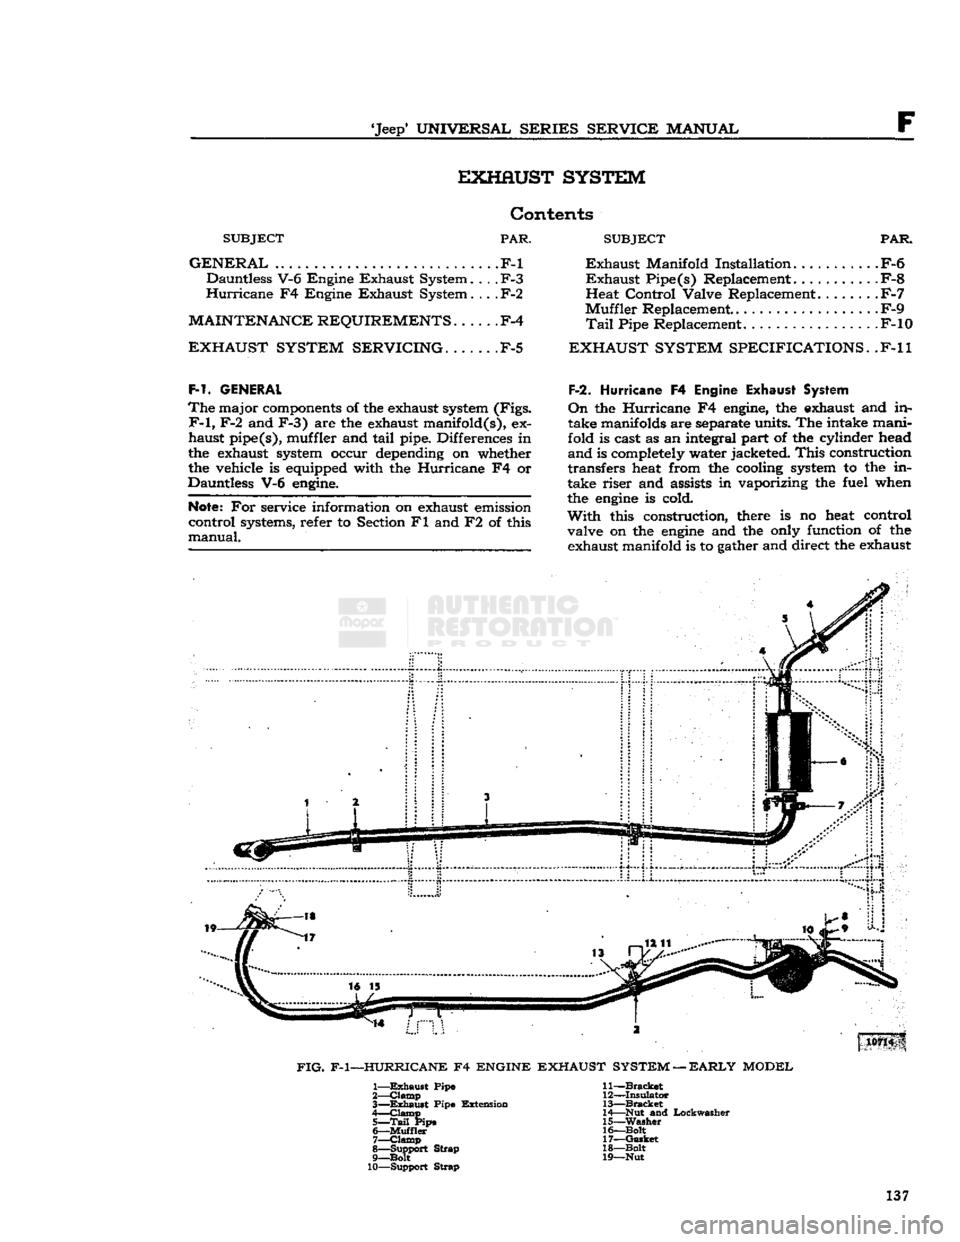 JEEP CJ 1953  Service Manual 
Jeep*
 UNIVERSAL SERIES SERVICE
 MANUAL 

F EXHAUST SYSTEM 

Contents 

SUBJECT
 PAR. 

GENERAL
 .F-l  Dauntless V-6 Engine Exhaust System....
 F-3 

Hurricane
 F4 Engine Exhaust System....
 F-2 

M